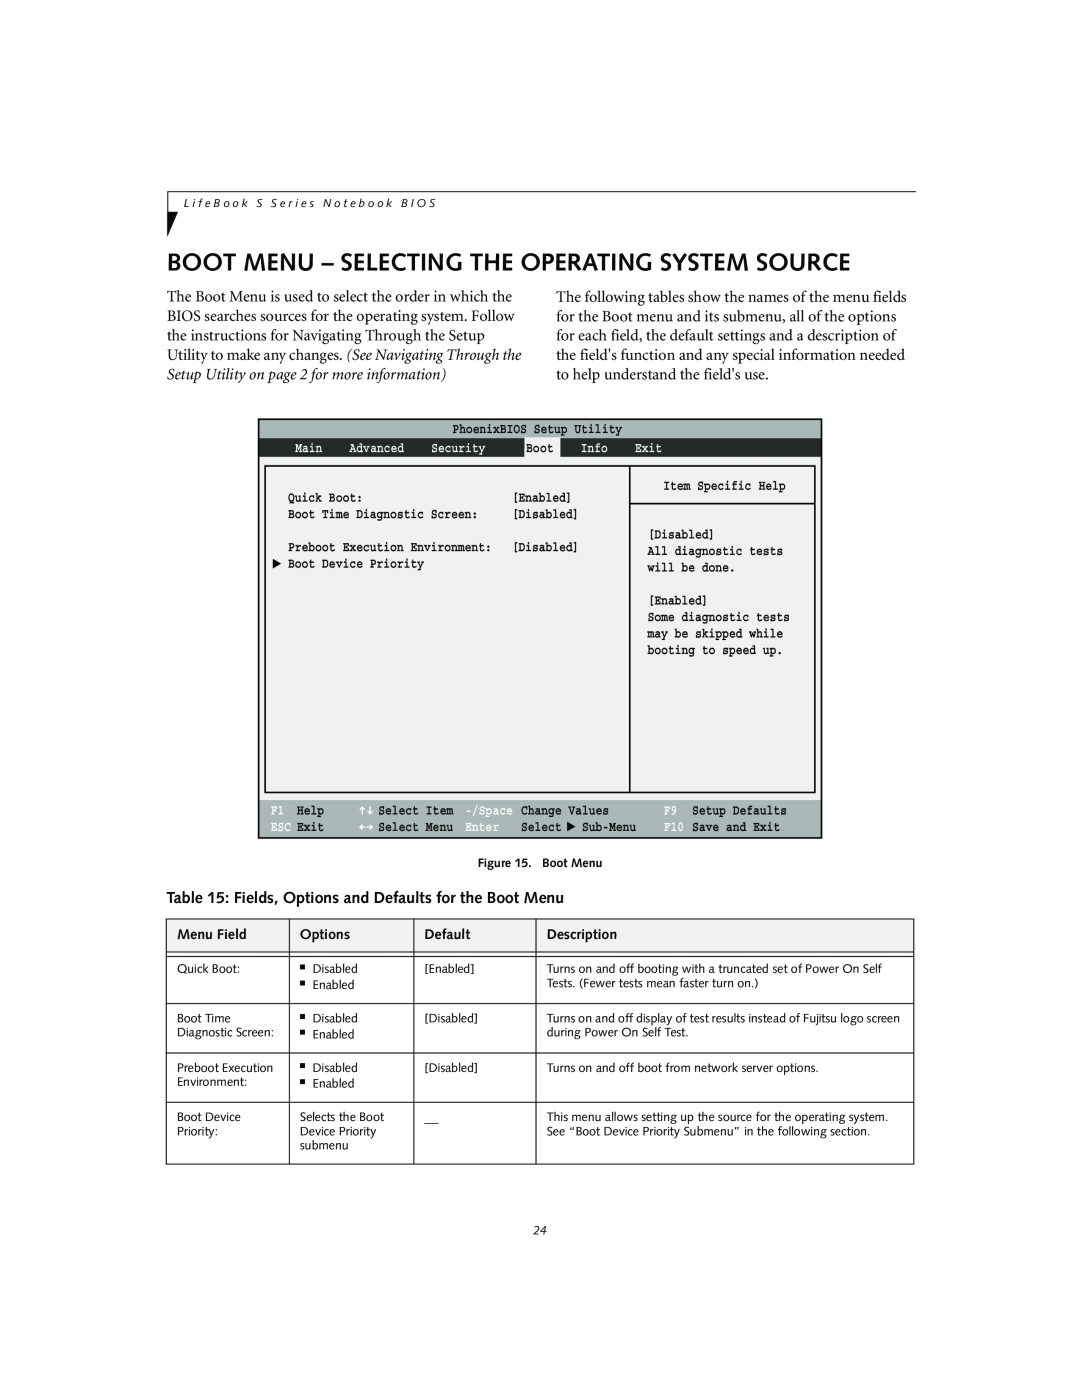 Fujitsu S2010 Boot Menu - Selecting The Operating System Source, Fields, Options and Defaults for the Boot Menu, Security 